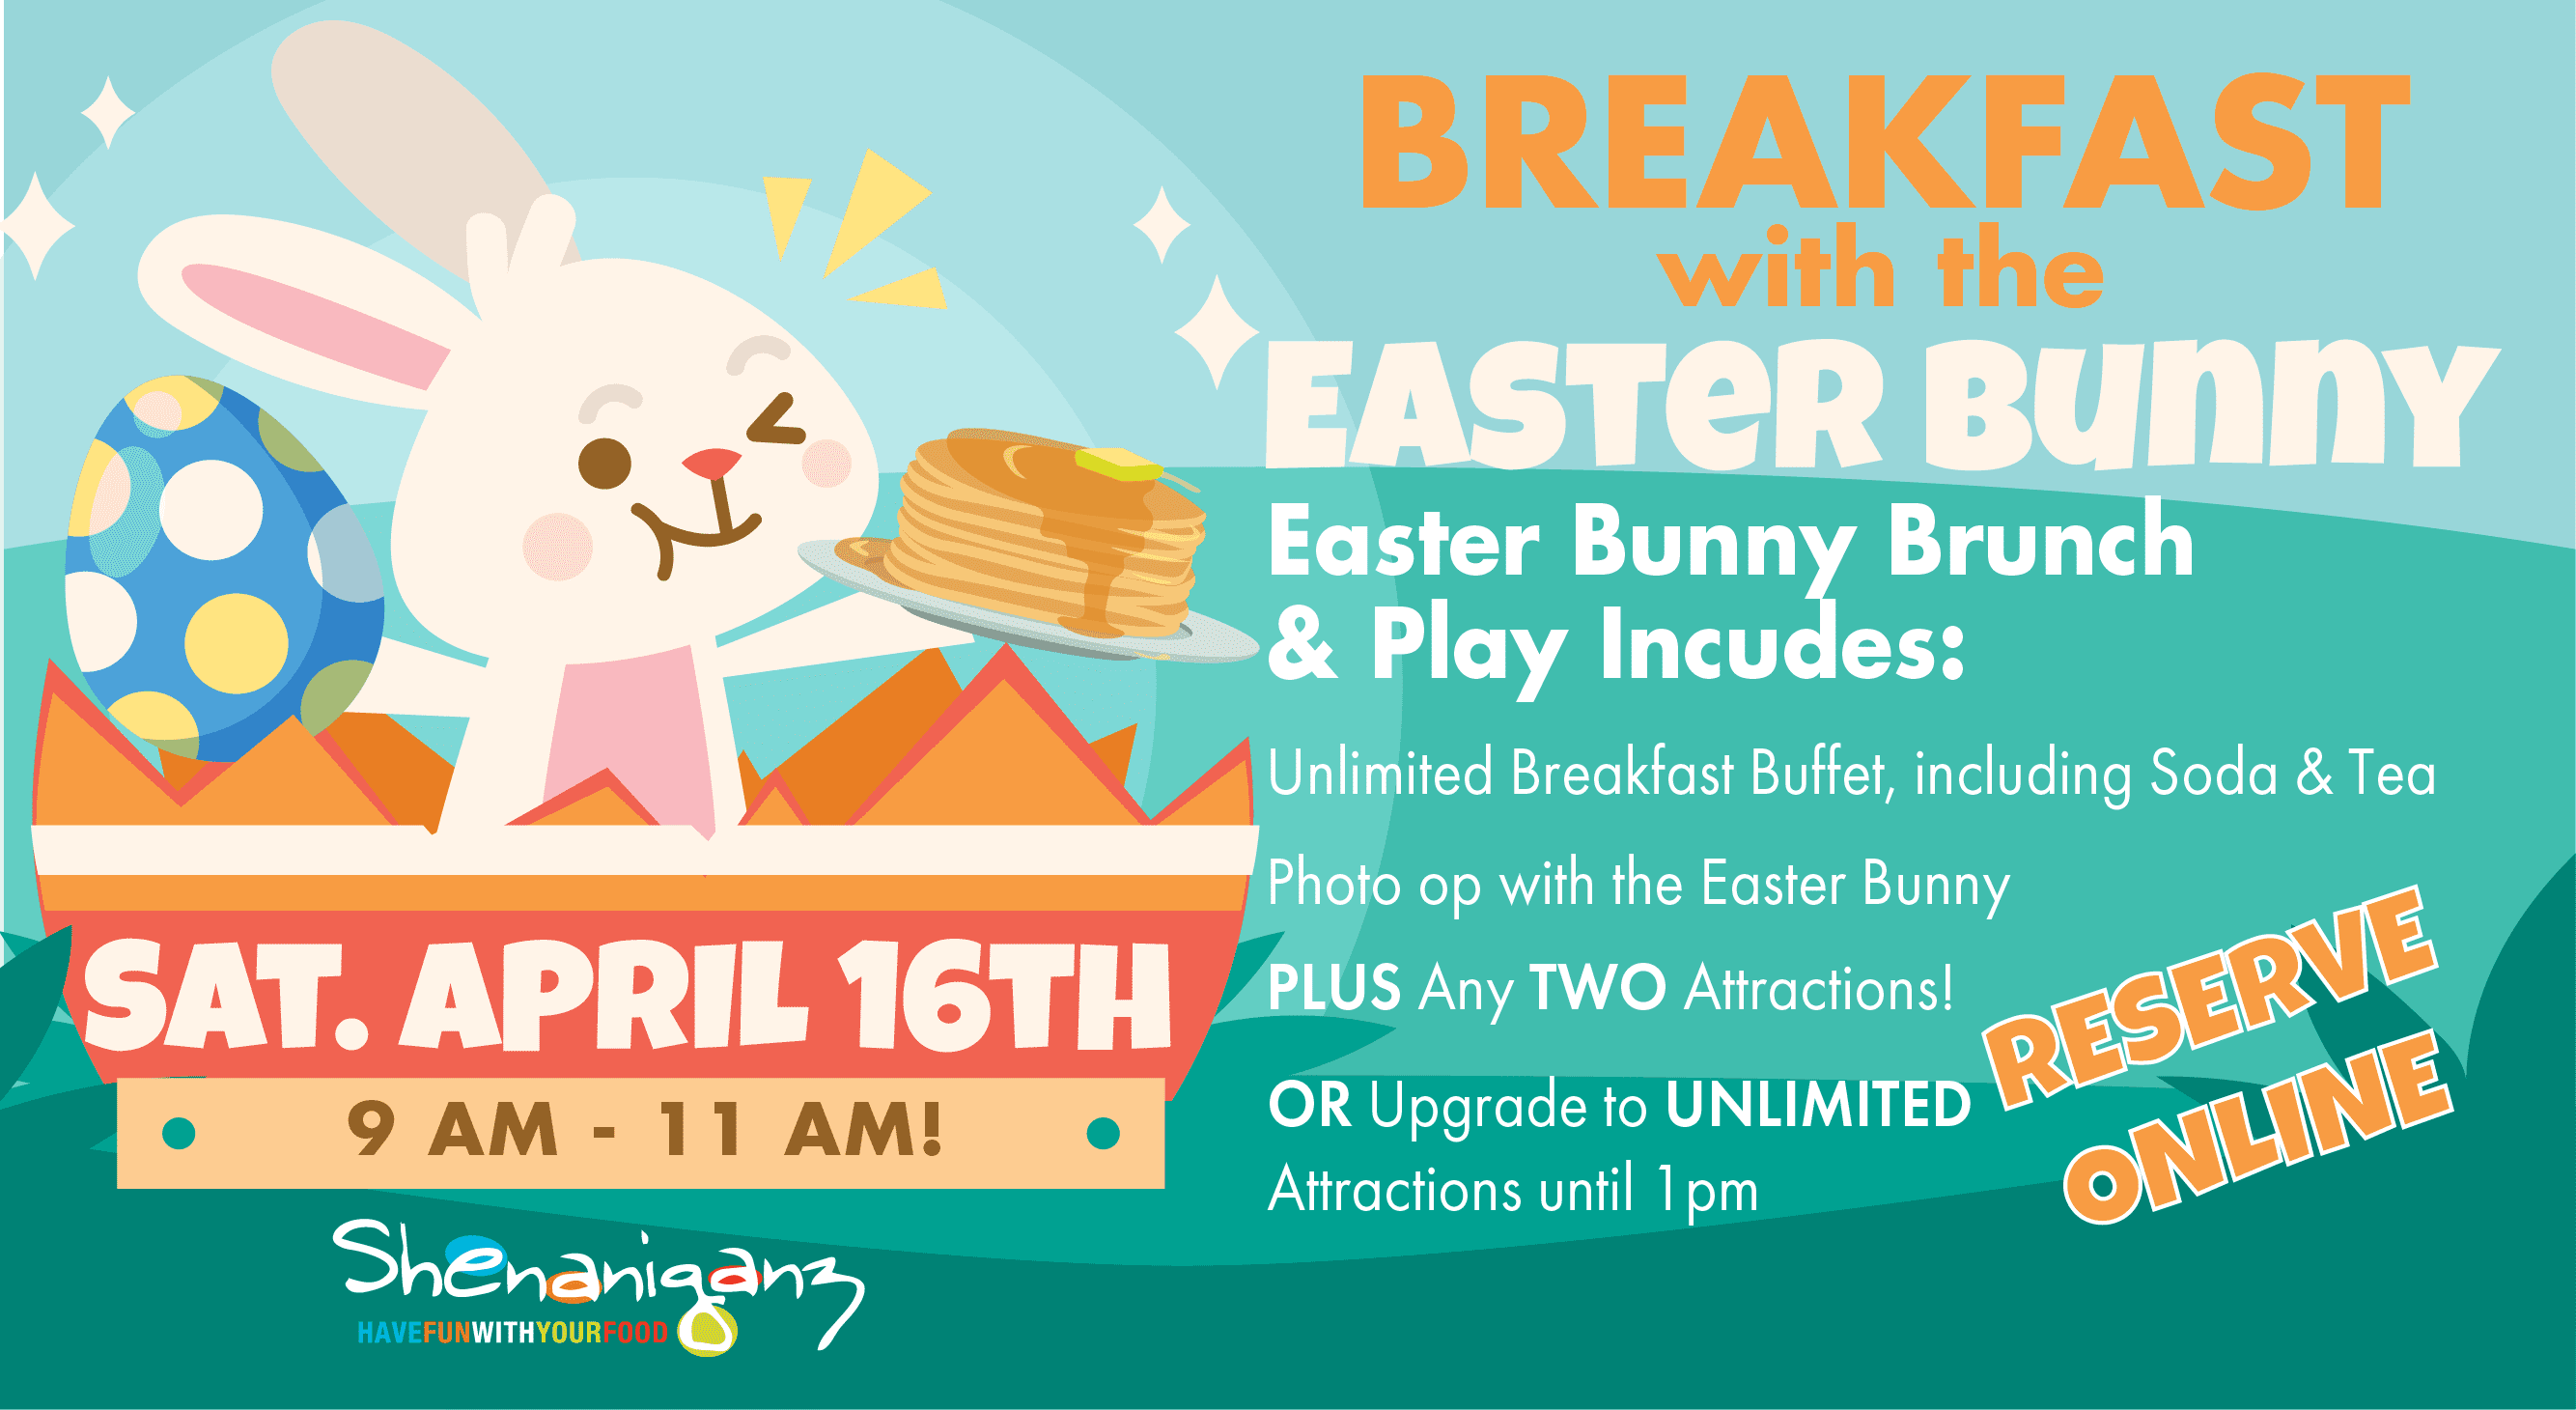 Breakfast with the Easter Bunny! Saturday April 16th 9 am to 11 am. Easter bunny brunch and playy includes, Unlimited breakfast buffet, including soda & tea. Photo opportunity with the Easter Bunny, PLUS and TWO Attractions.